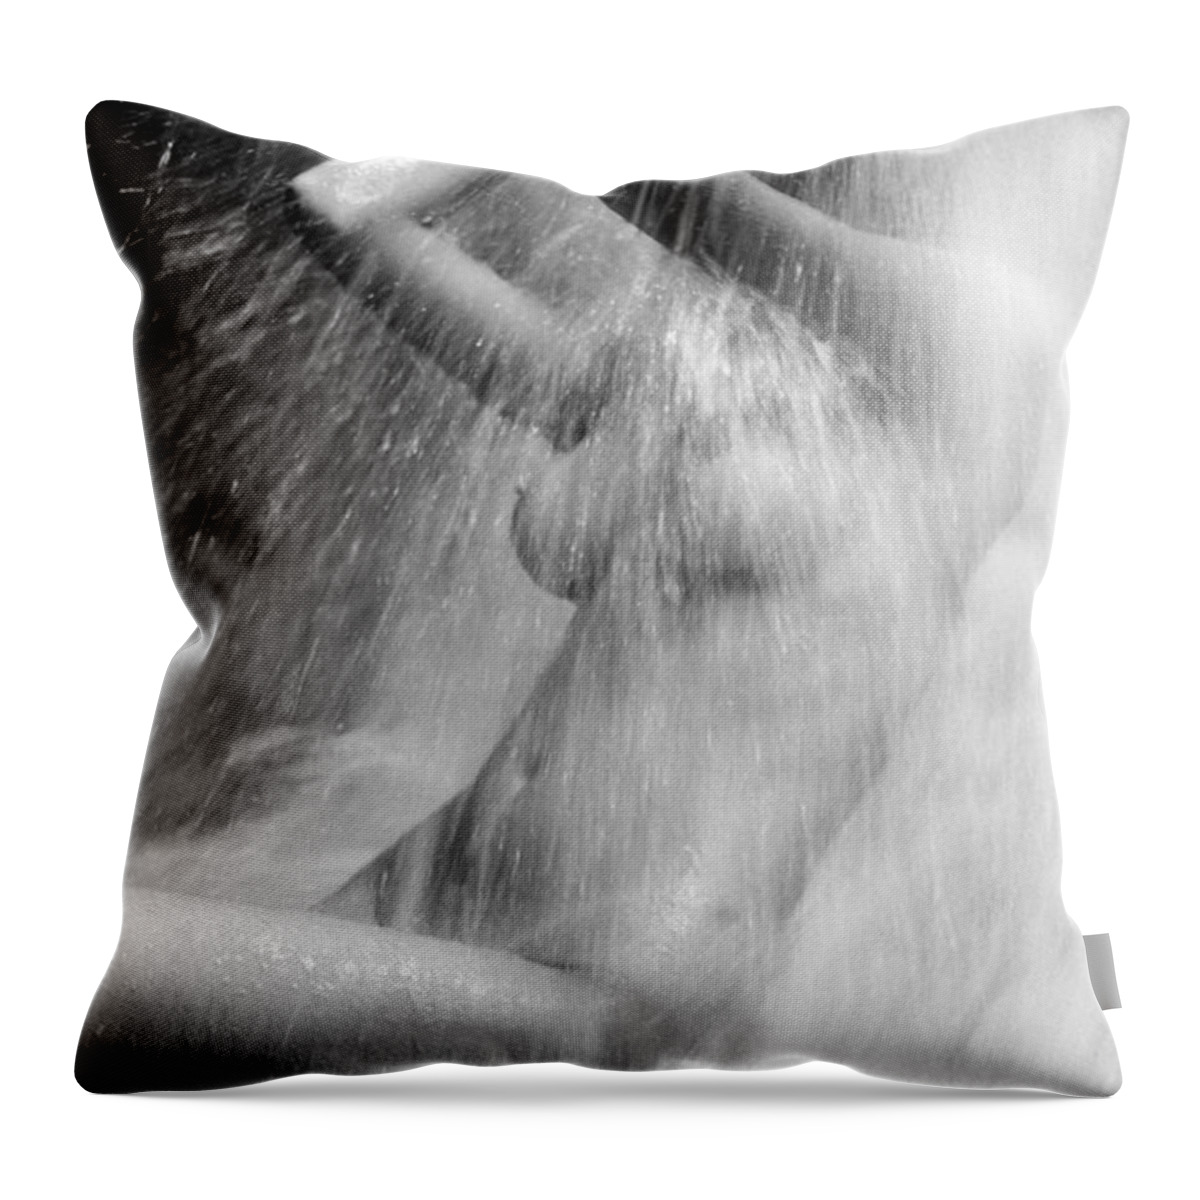 Shower Throw Pillow featuring the photograph Young Woman In The Shower by Juan Silva